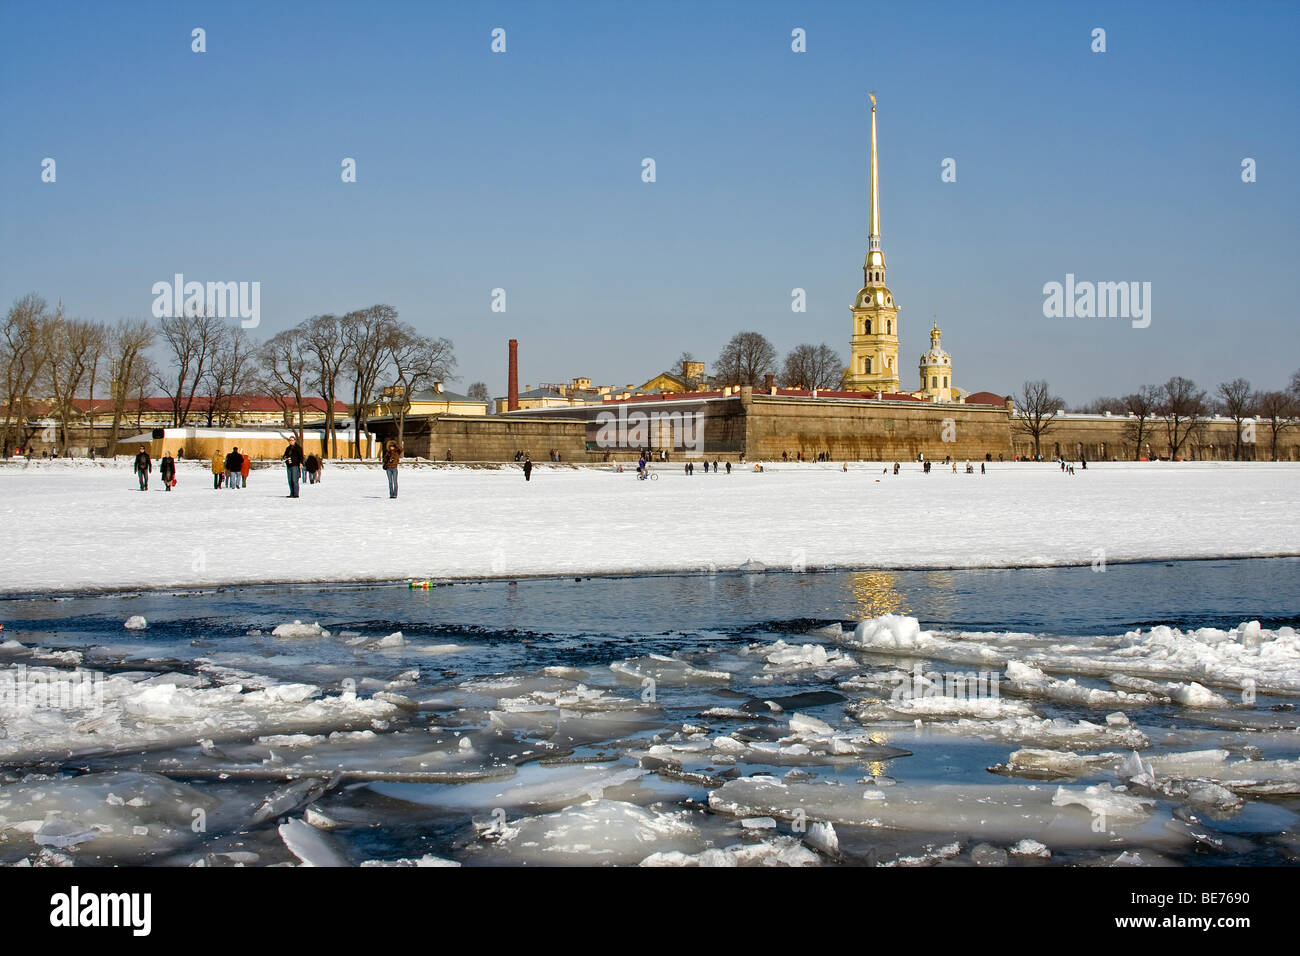 The Peter and Paul Fortress, St. Petersburg, Russia Stock Photo